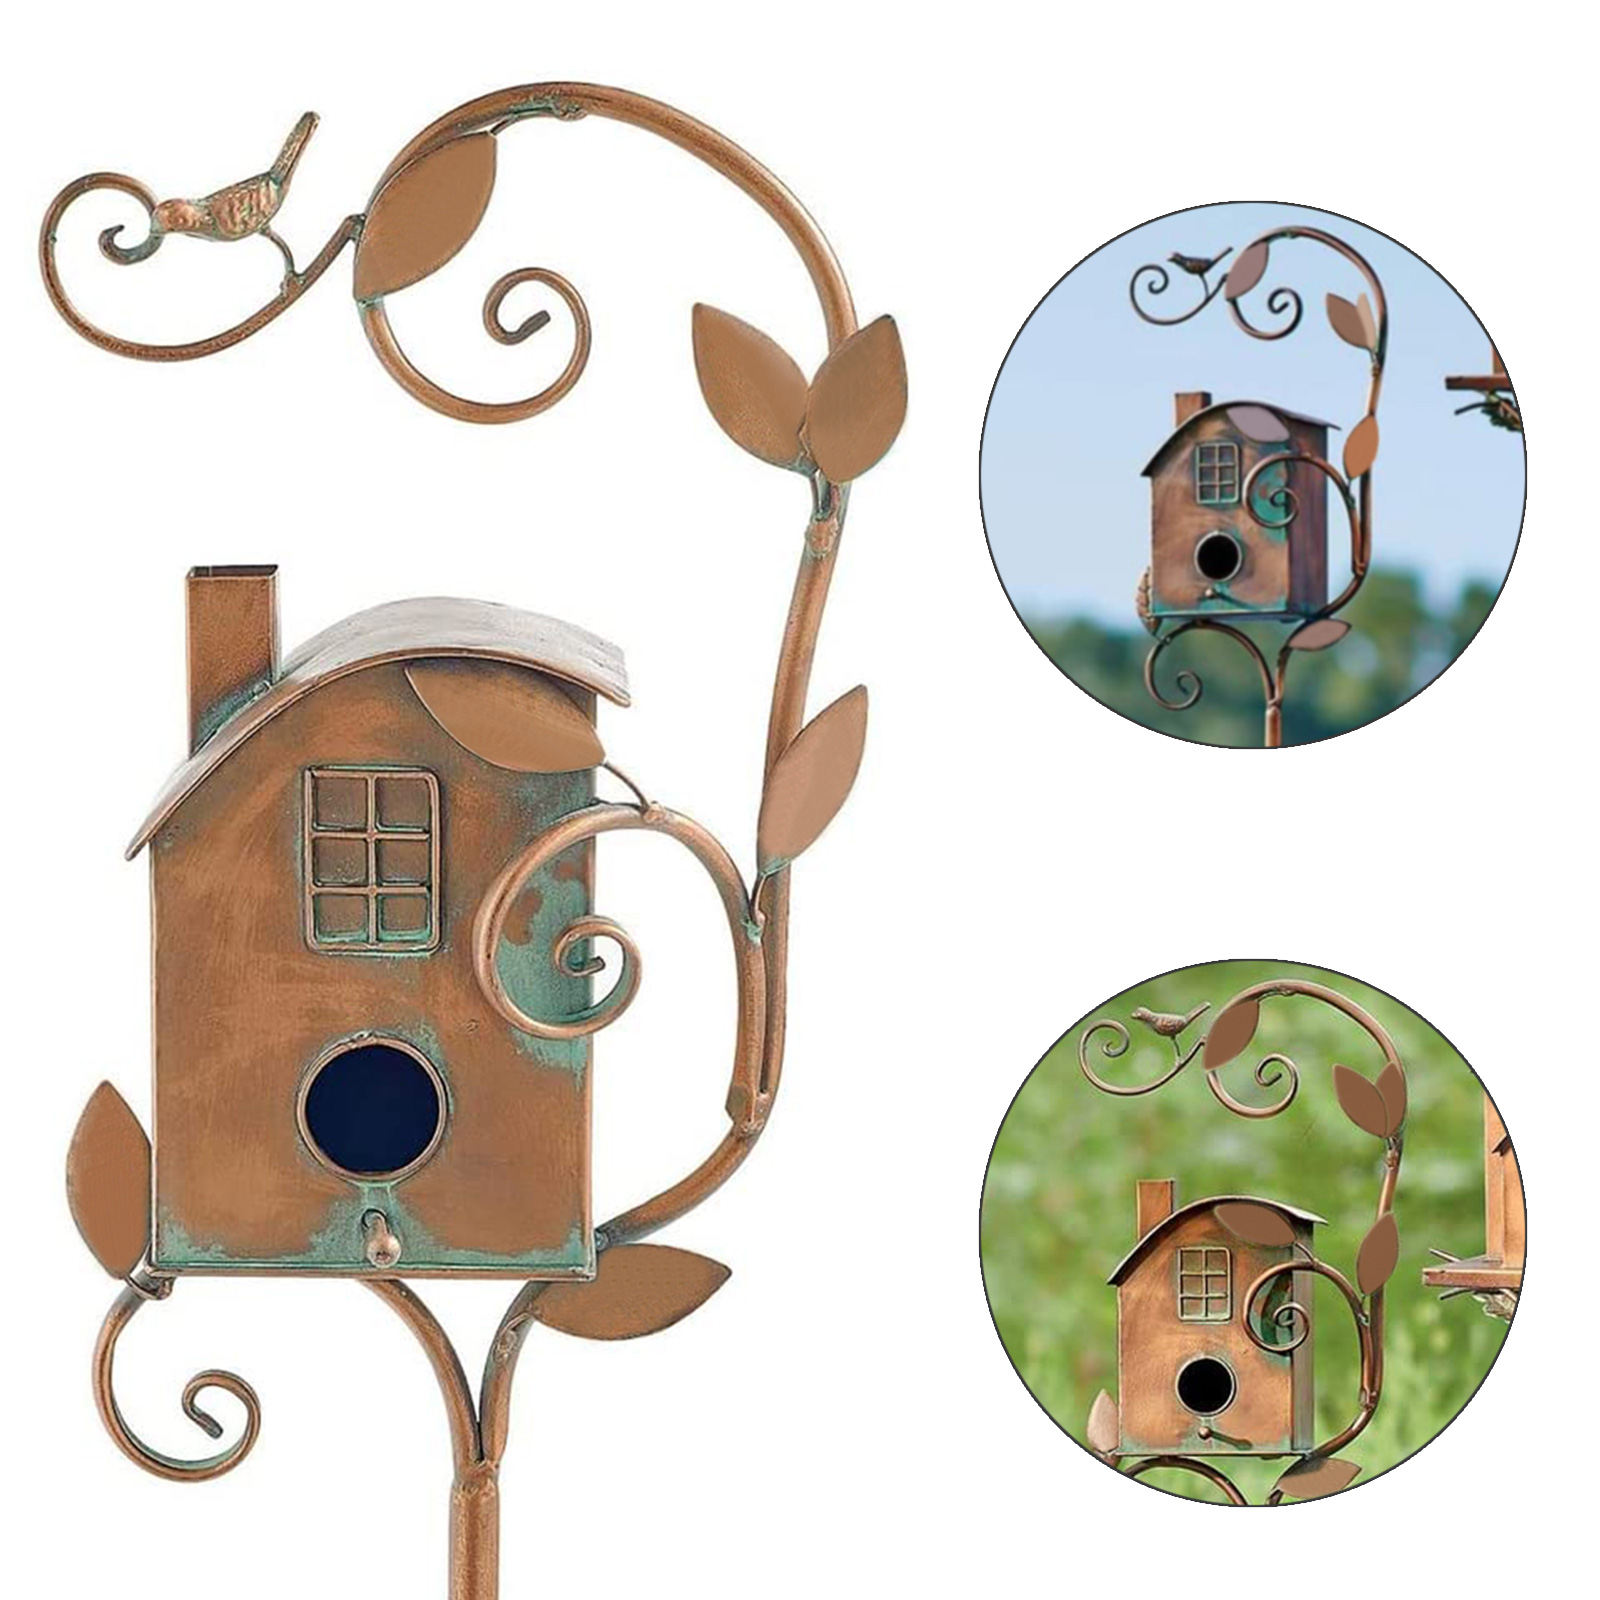 Asdomo Metal Birdhouse Garden Stakes Bird's Nest Multi-size Yellow Easy To Assemble Resting Place For Birds - image 5 of 8